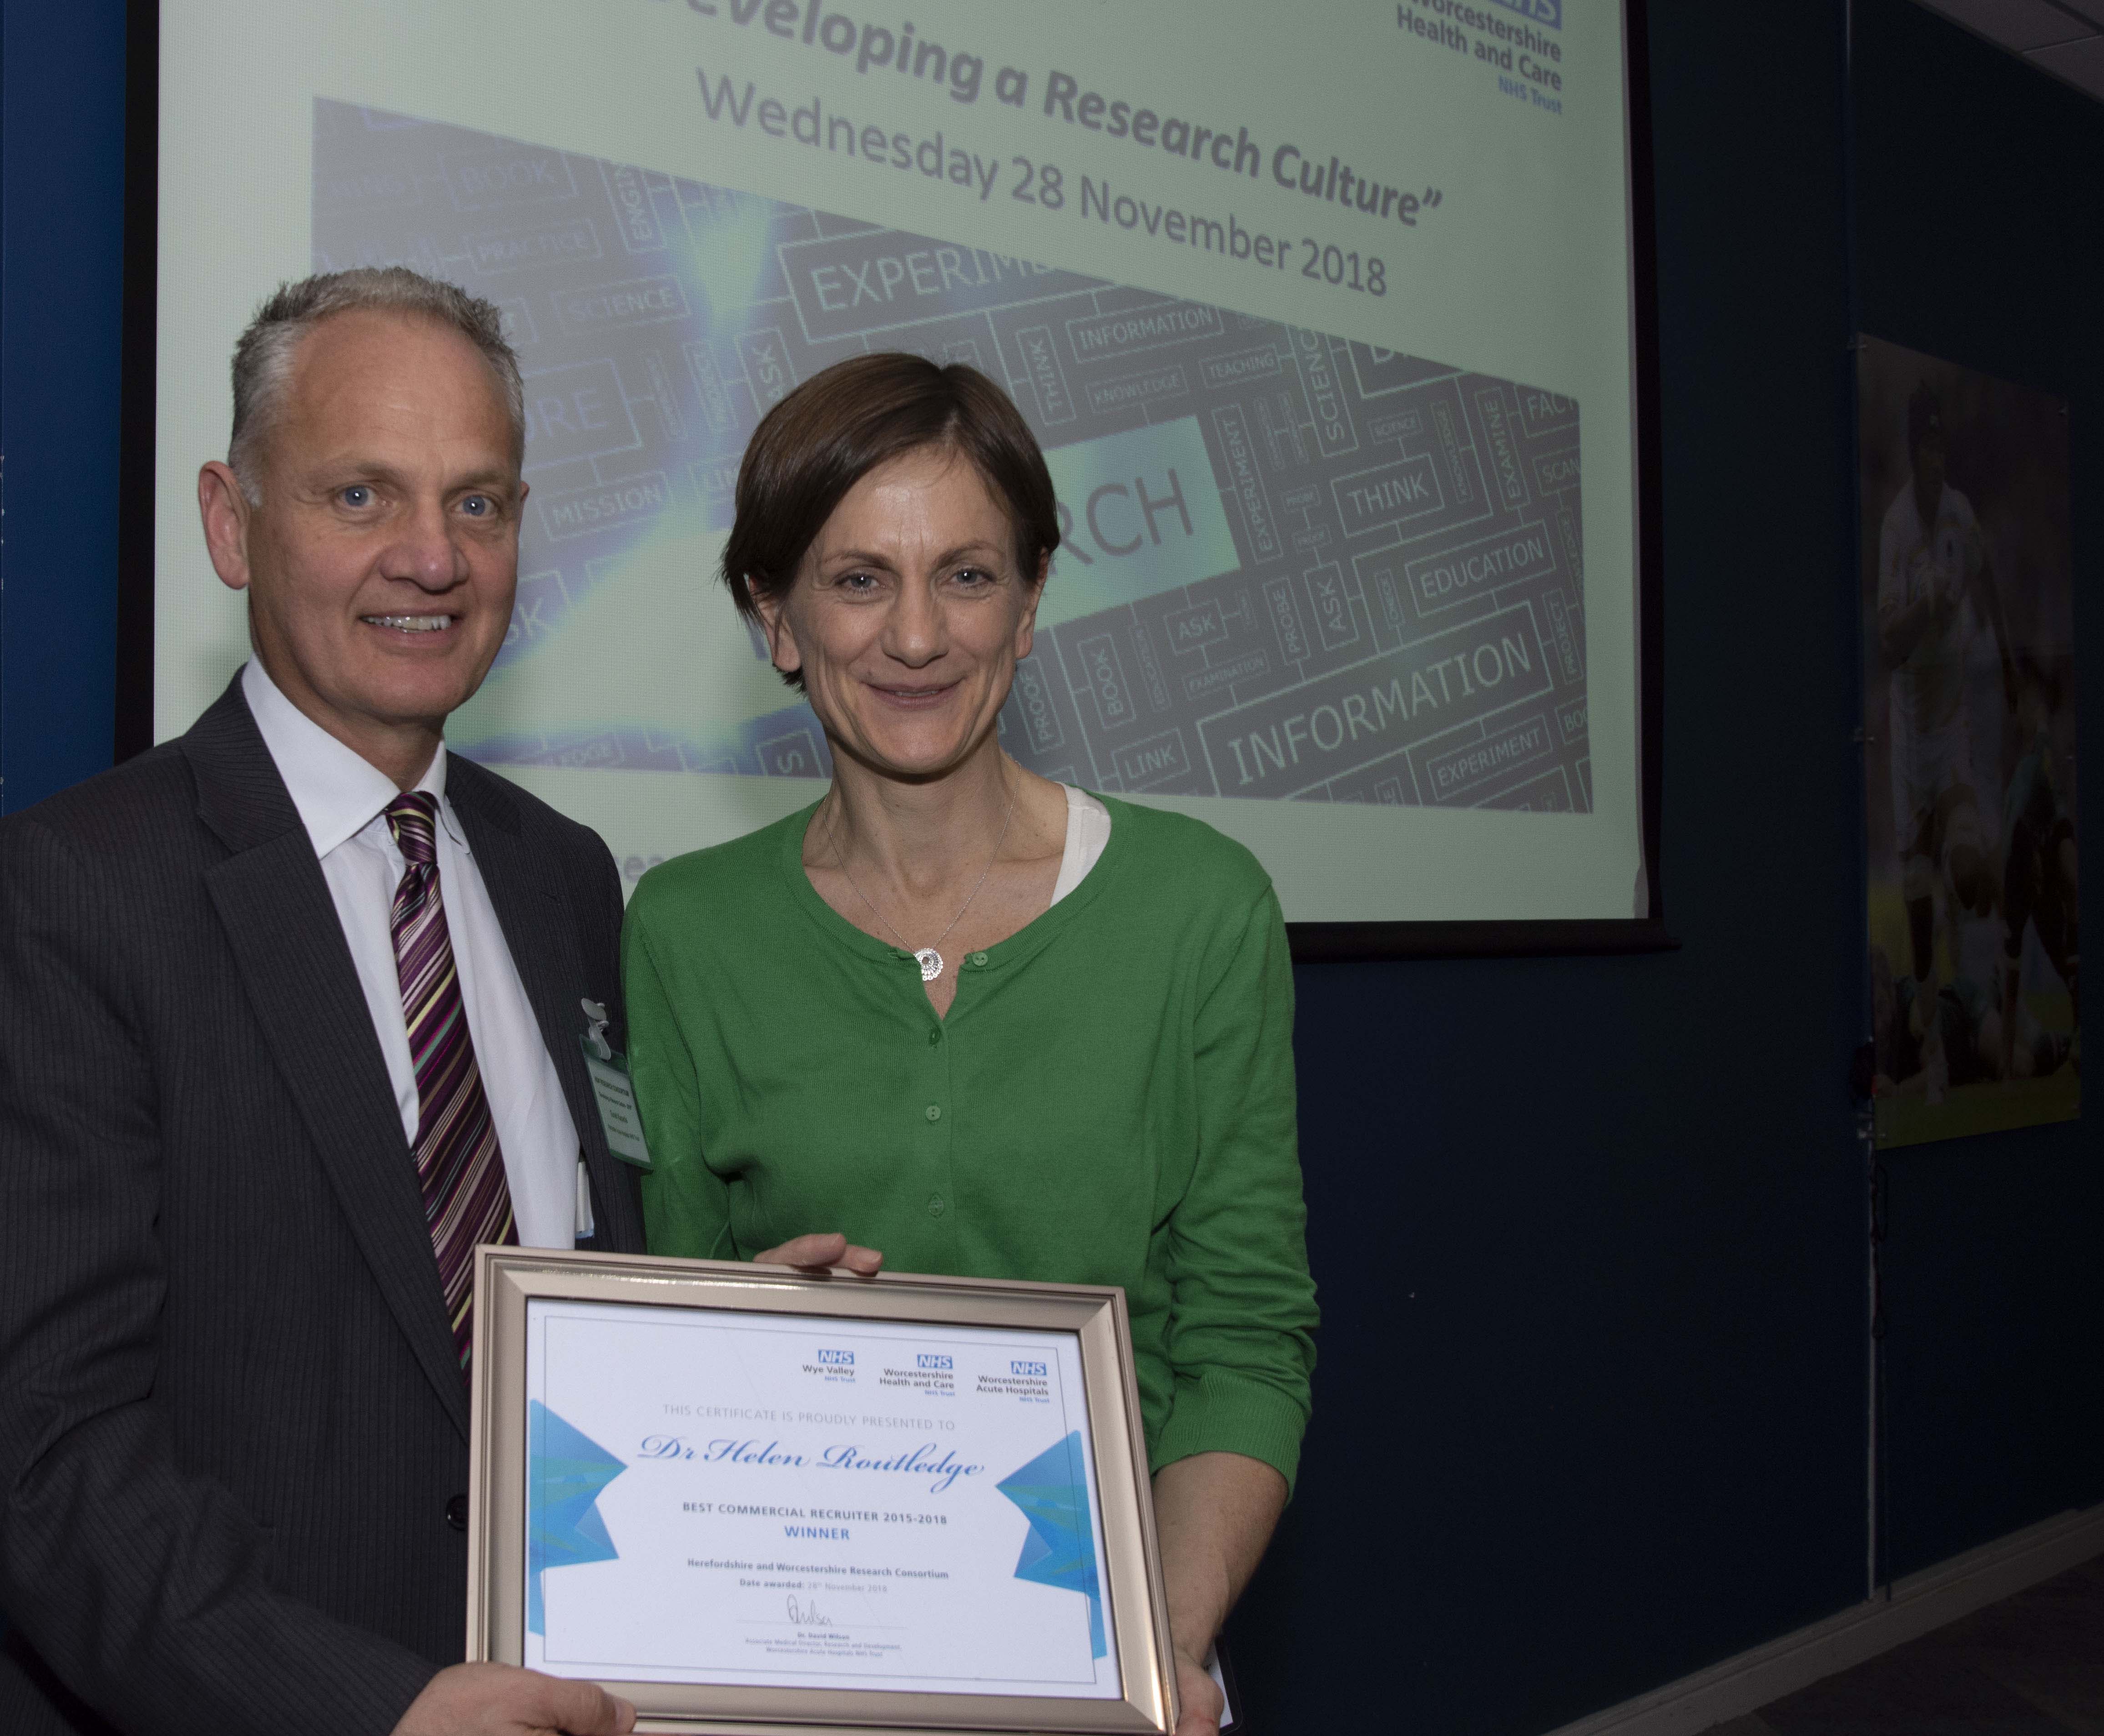 new generation senior clinical and practitioner research award